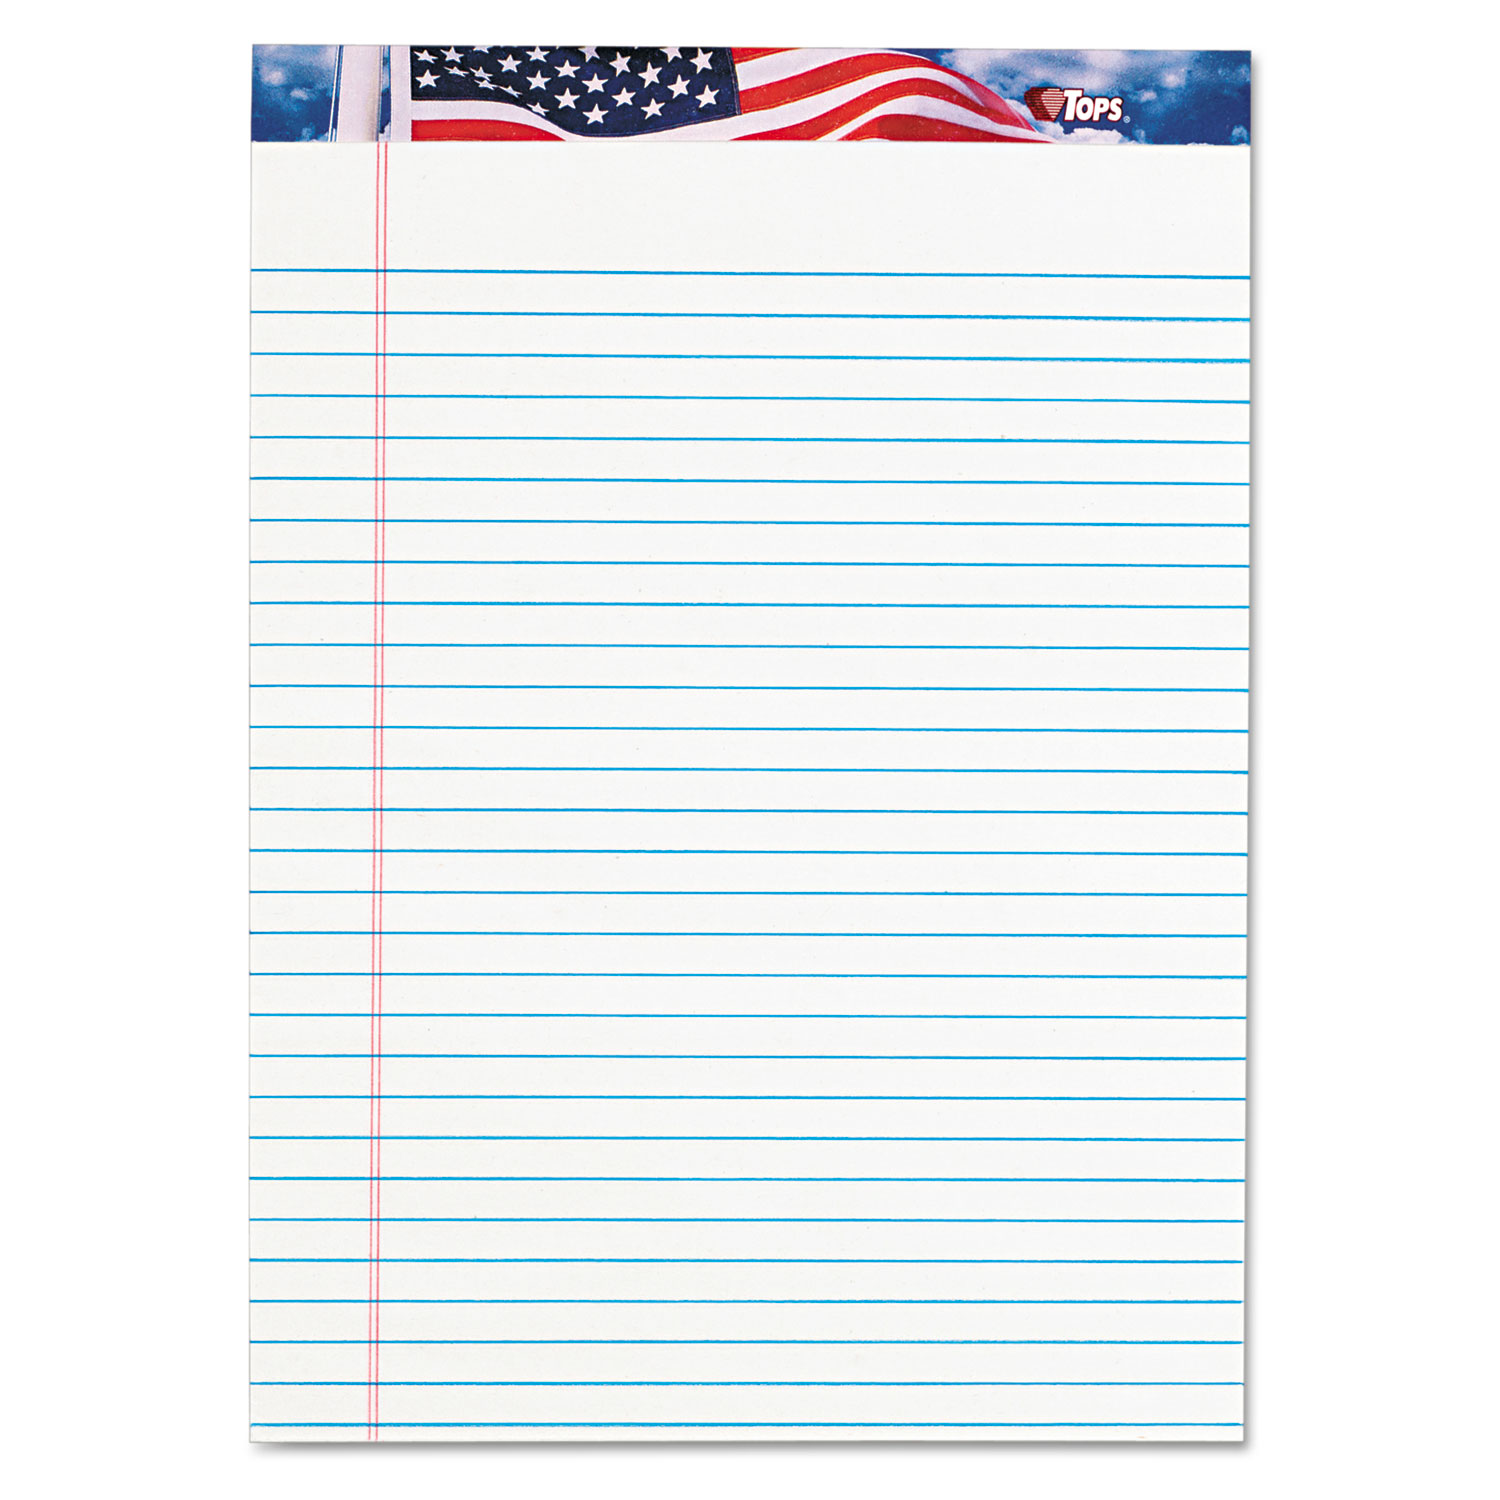  TOPS 75140 American Pride Writing Pad, Wide/Legal Rule, 8.5 x 11.75, White, 50 Sheets, 12/Pack (TOP75140) 